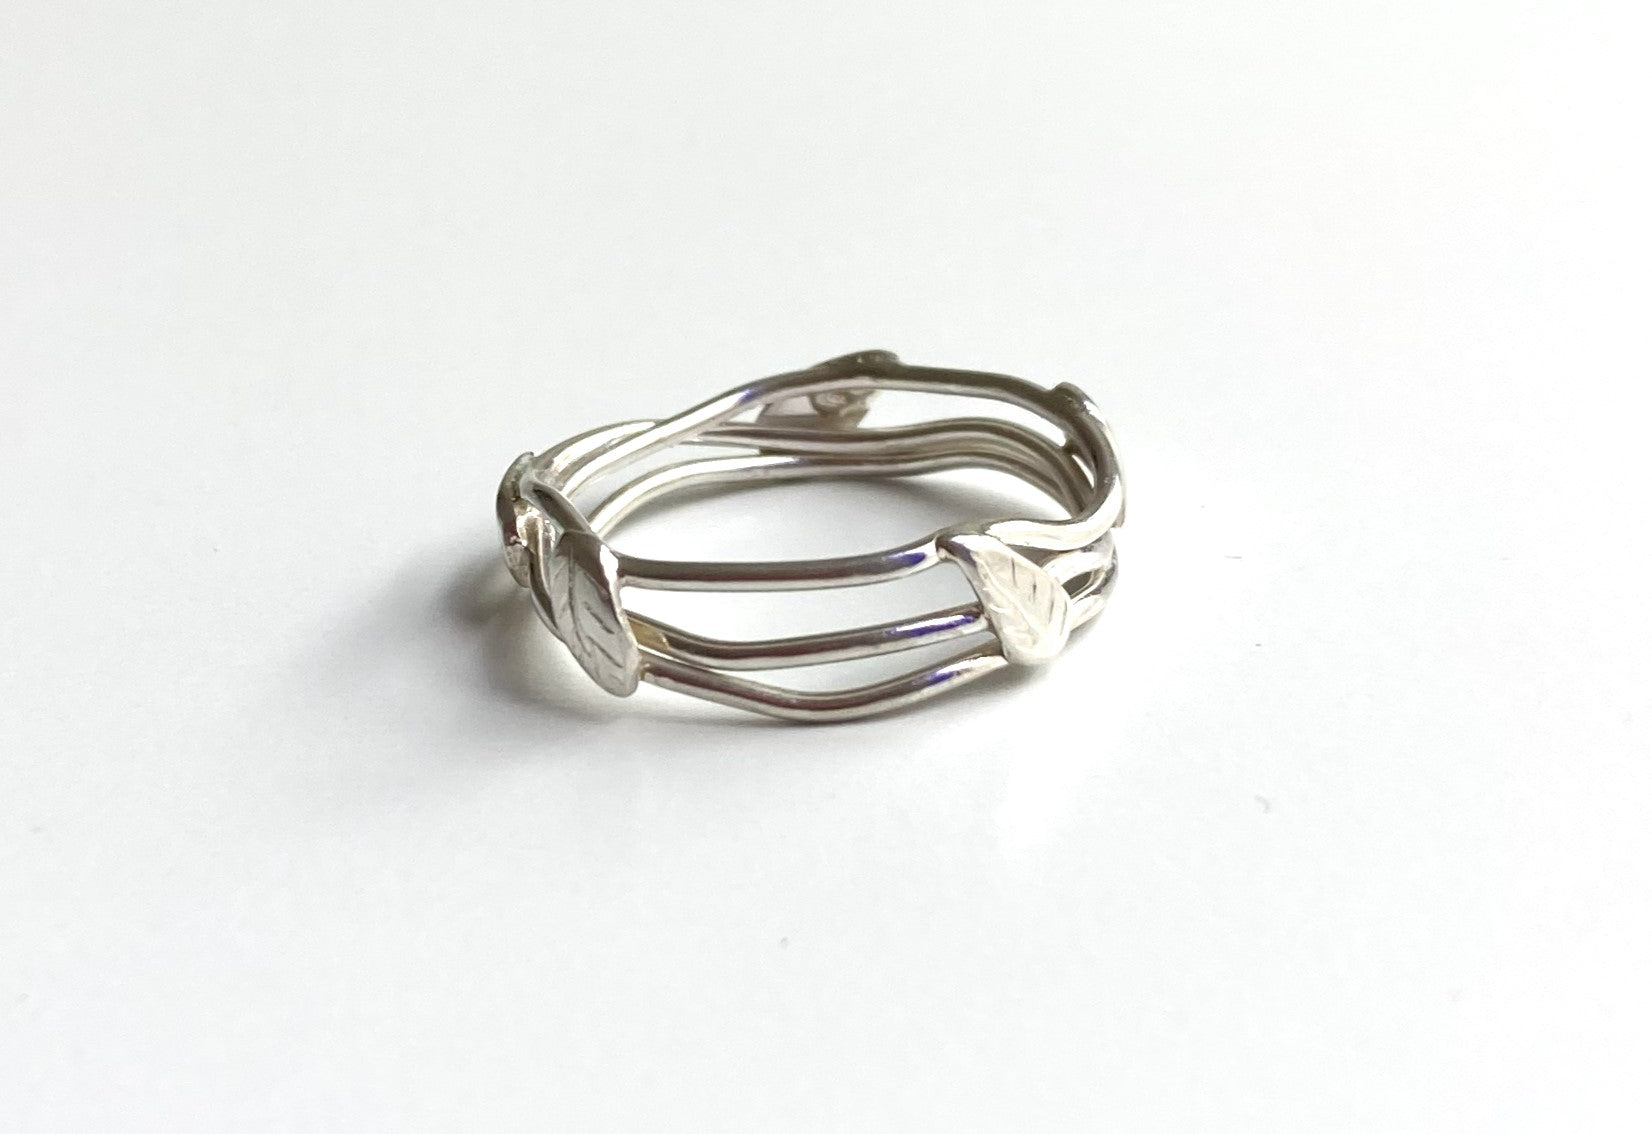 entwined garden leaf ring handmade in sterling silver